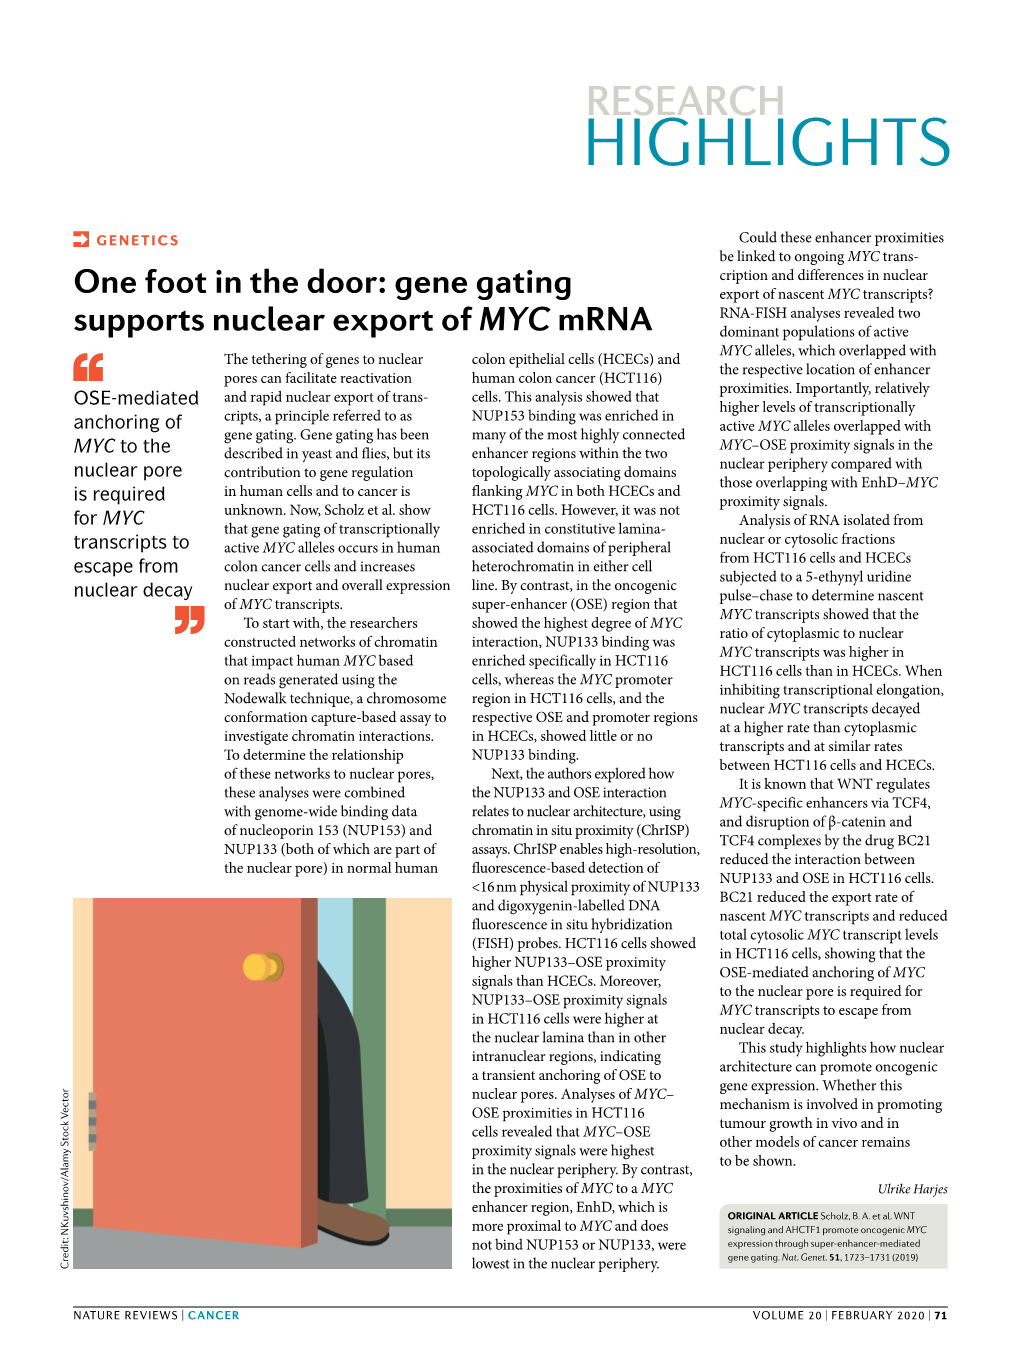 One Foot in the Door: Gene Gating Supports Nuclear Export of MYC